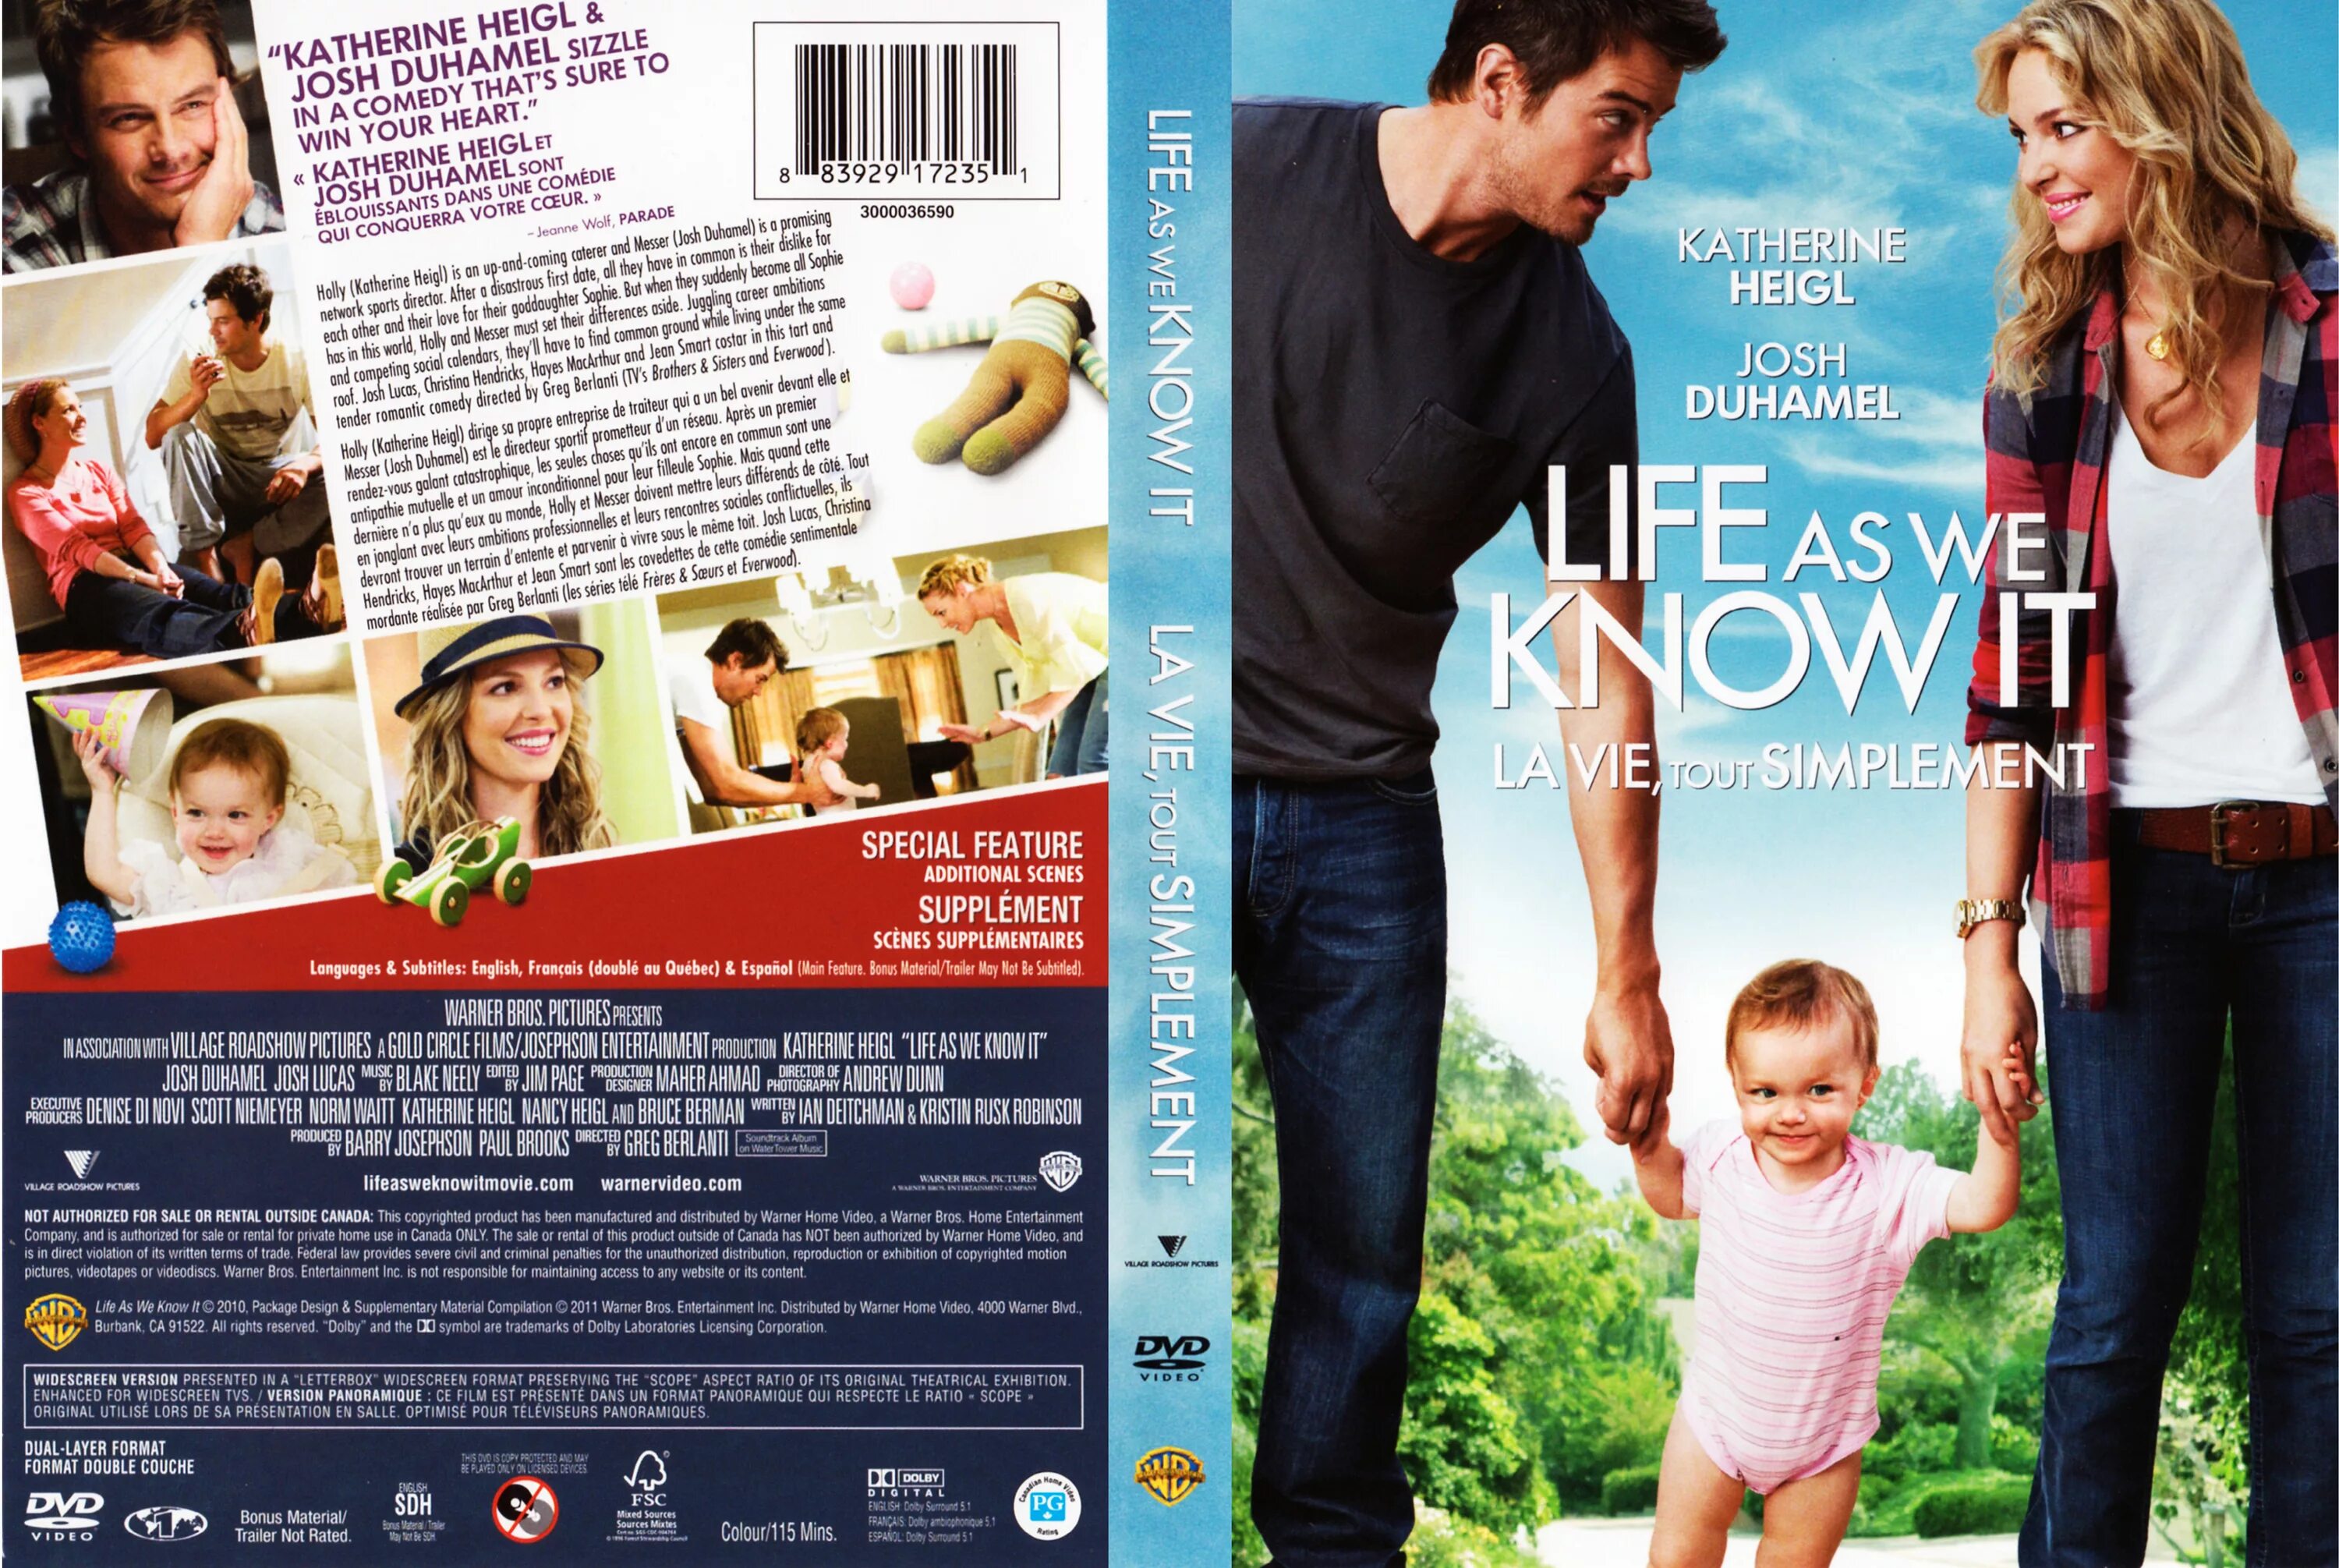 Life as we know it. Life as we know it 2010. Джош Дюамель и Кэтрин Хейгл. Life as we know it TV Series. Life as you know it.